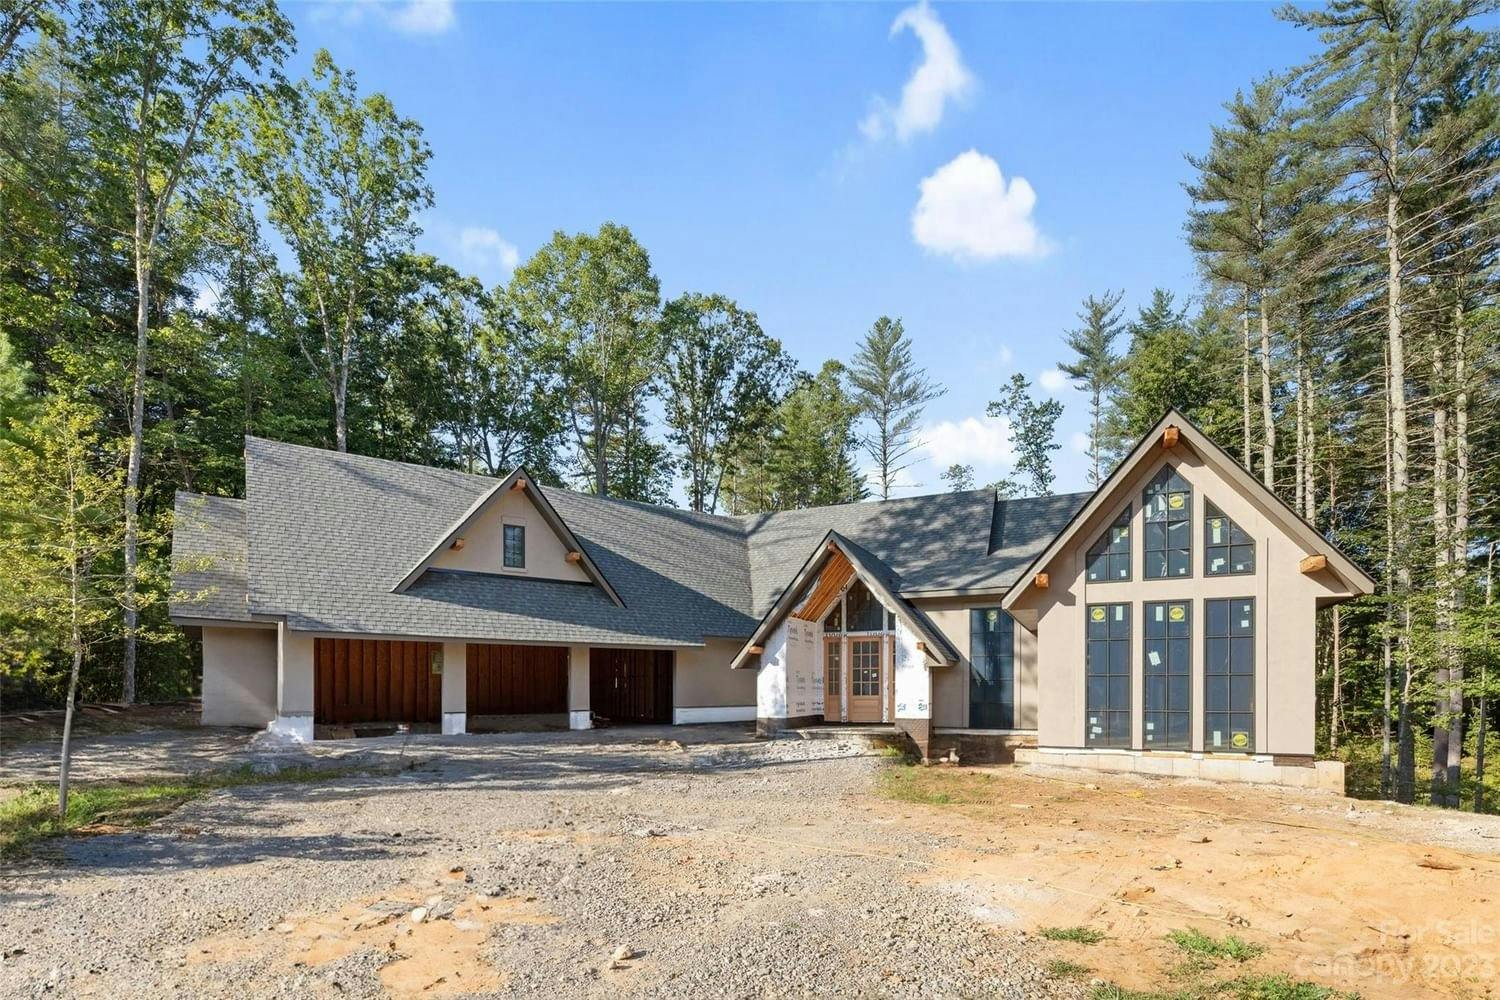 418 Moraine Court | The Ramble at Biltmore Forest